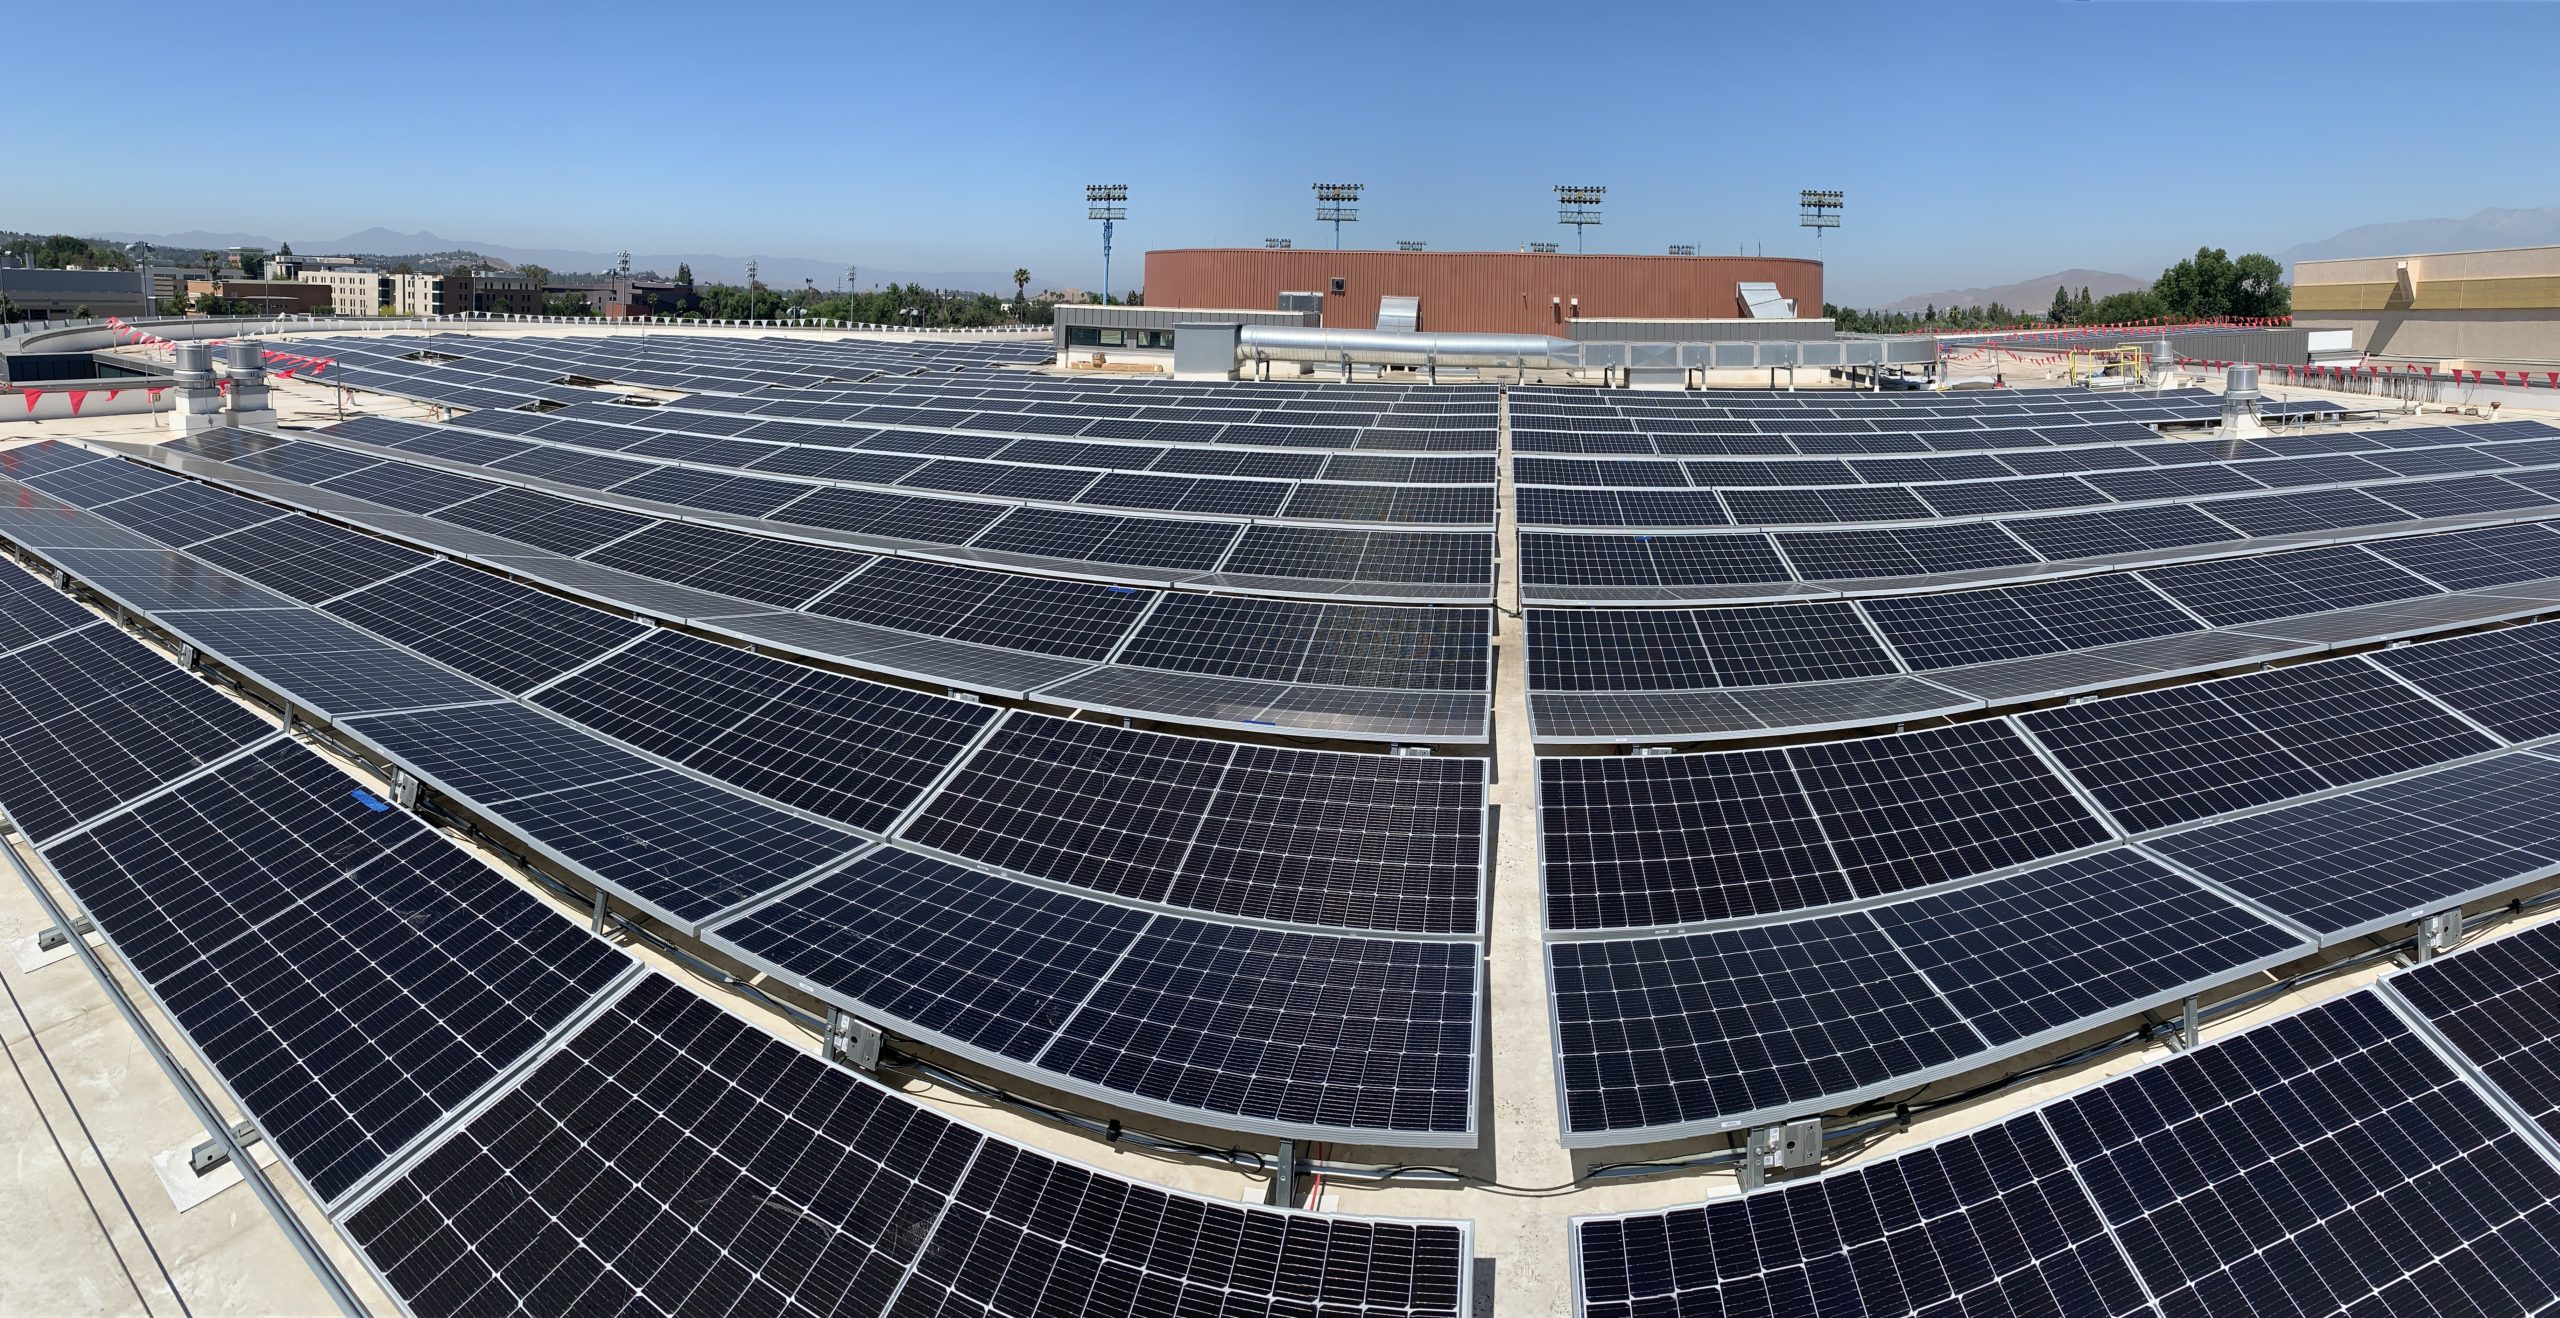 Added solar panels on two campus buildings